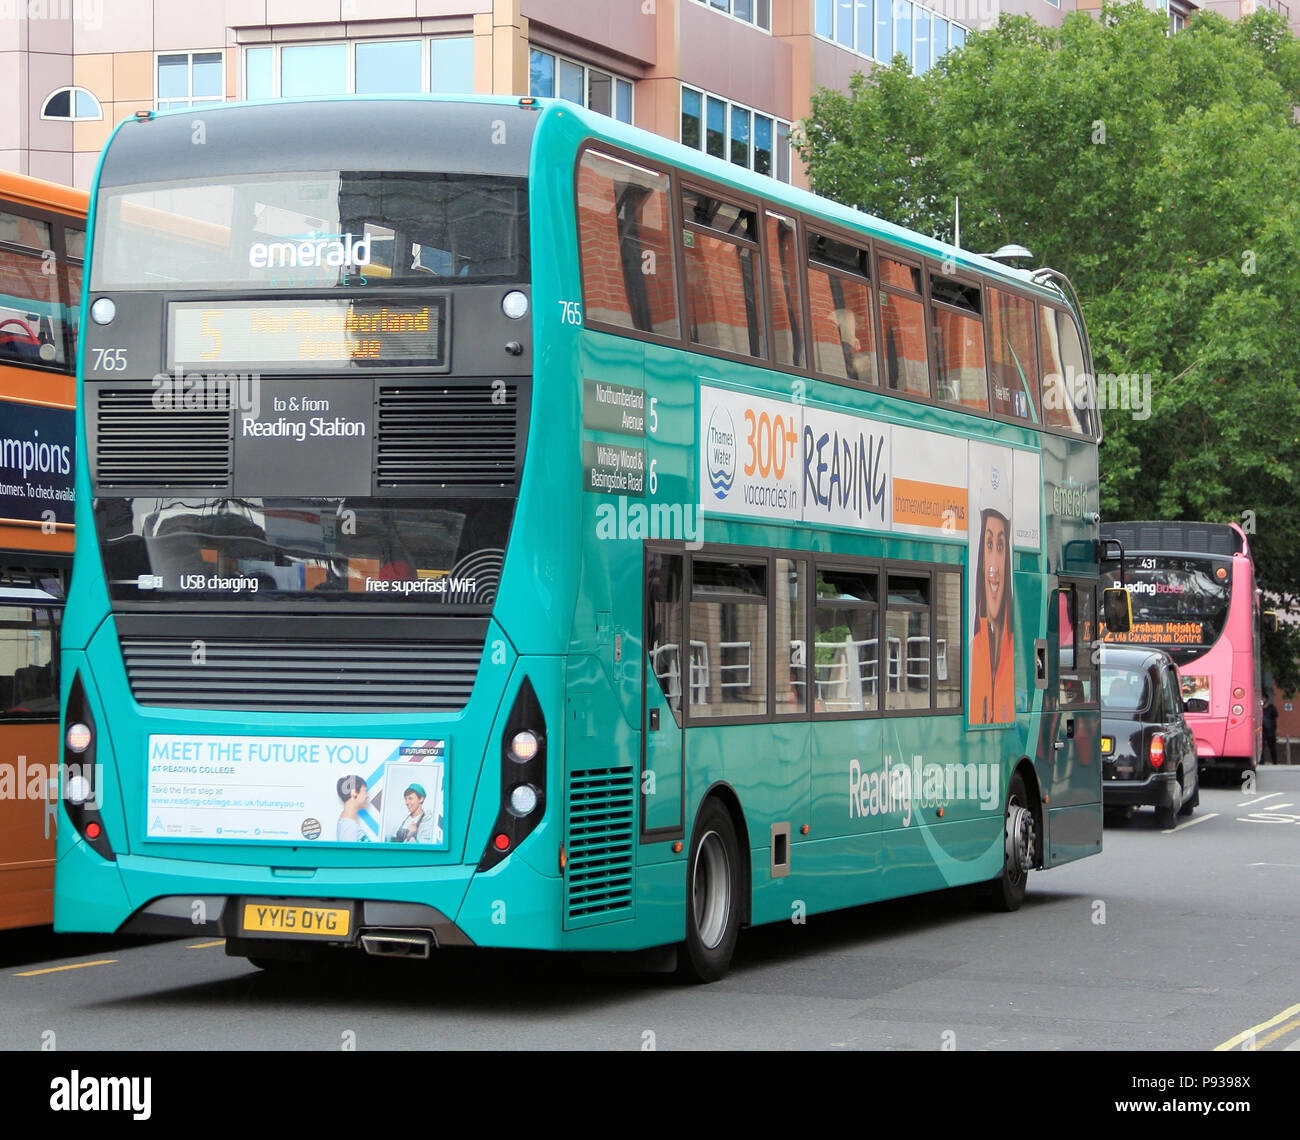 The buses of Reading are colour coded by their route., the colours include; Emerald, Claret, Sky blue, Jet black, yellow, orange, pink and more.... Stock Photo